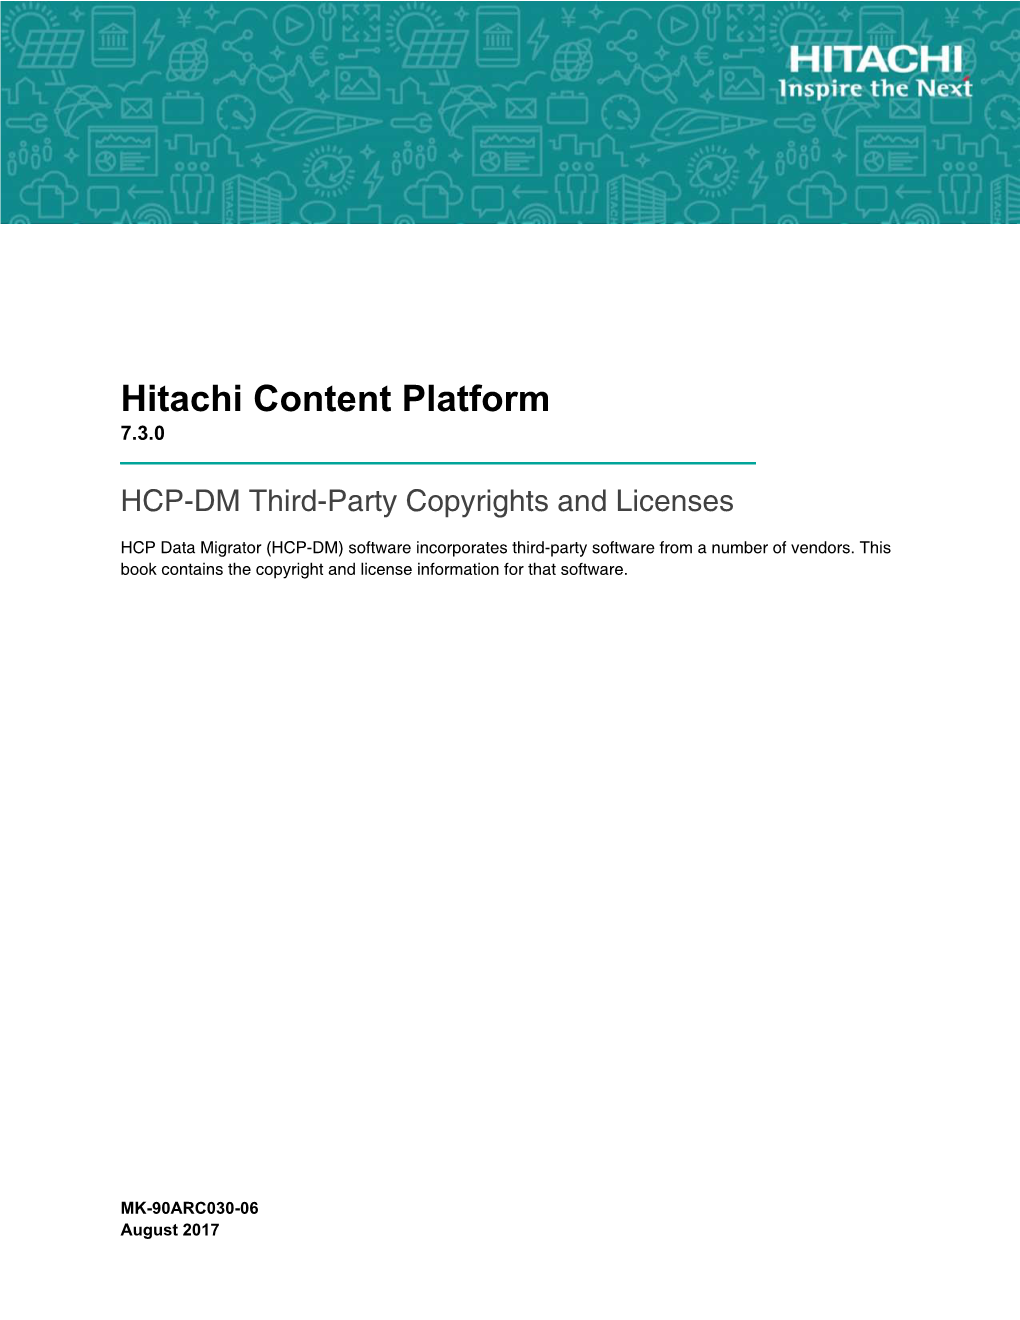 HCP-DM Third-Party Copyrights and Licenses